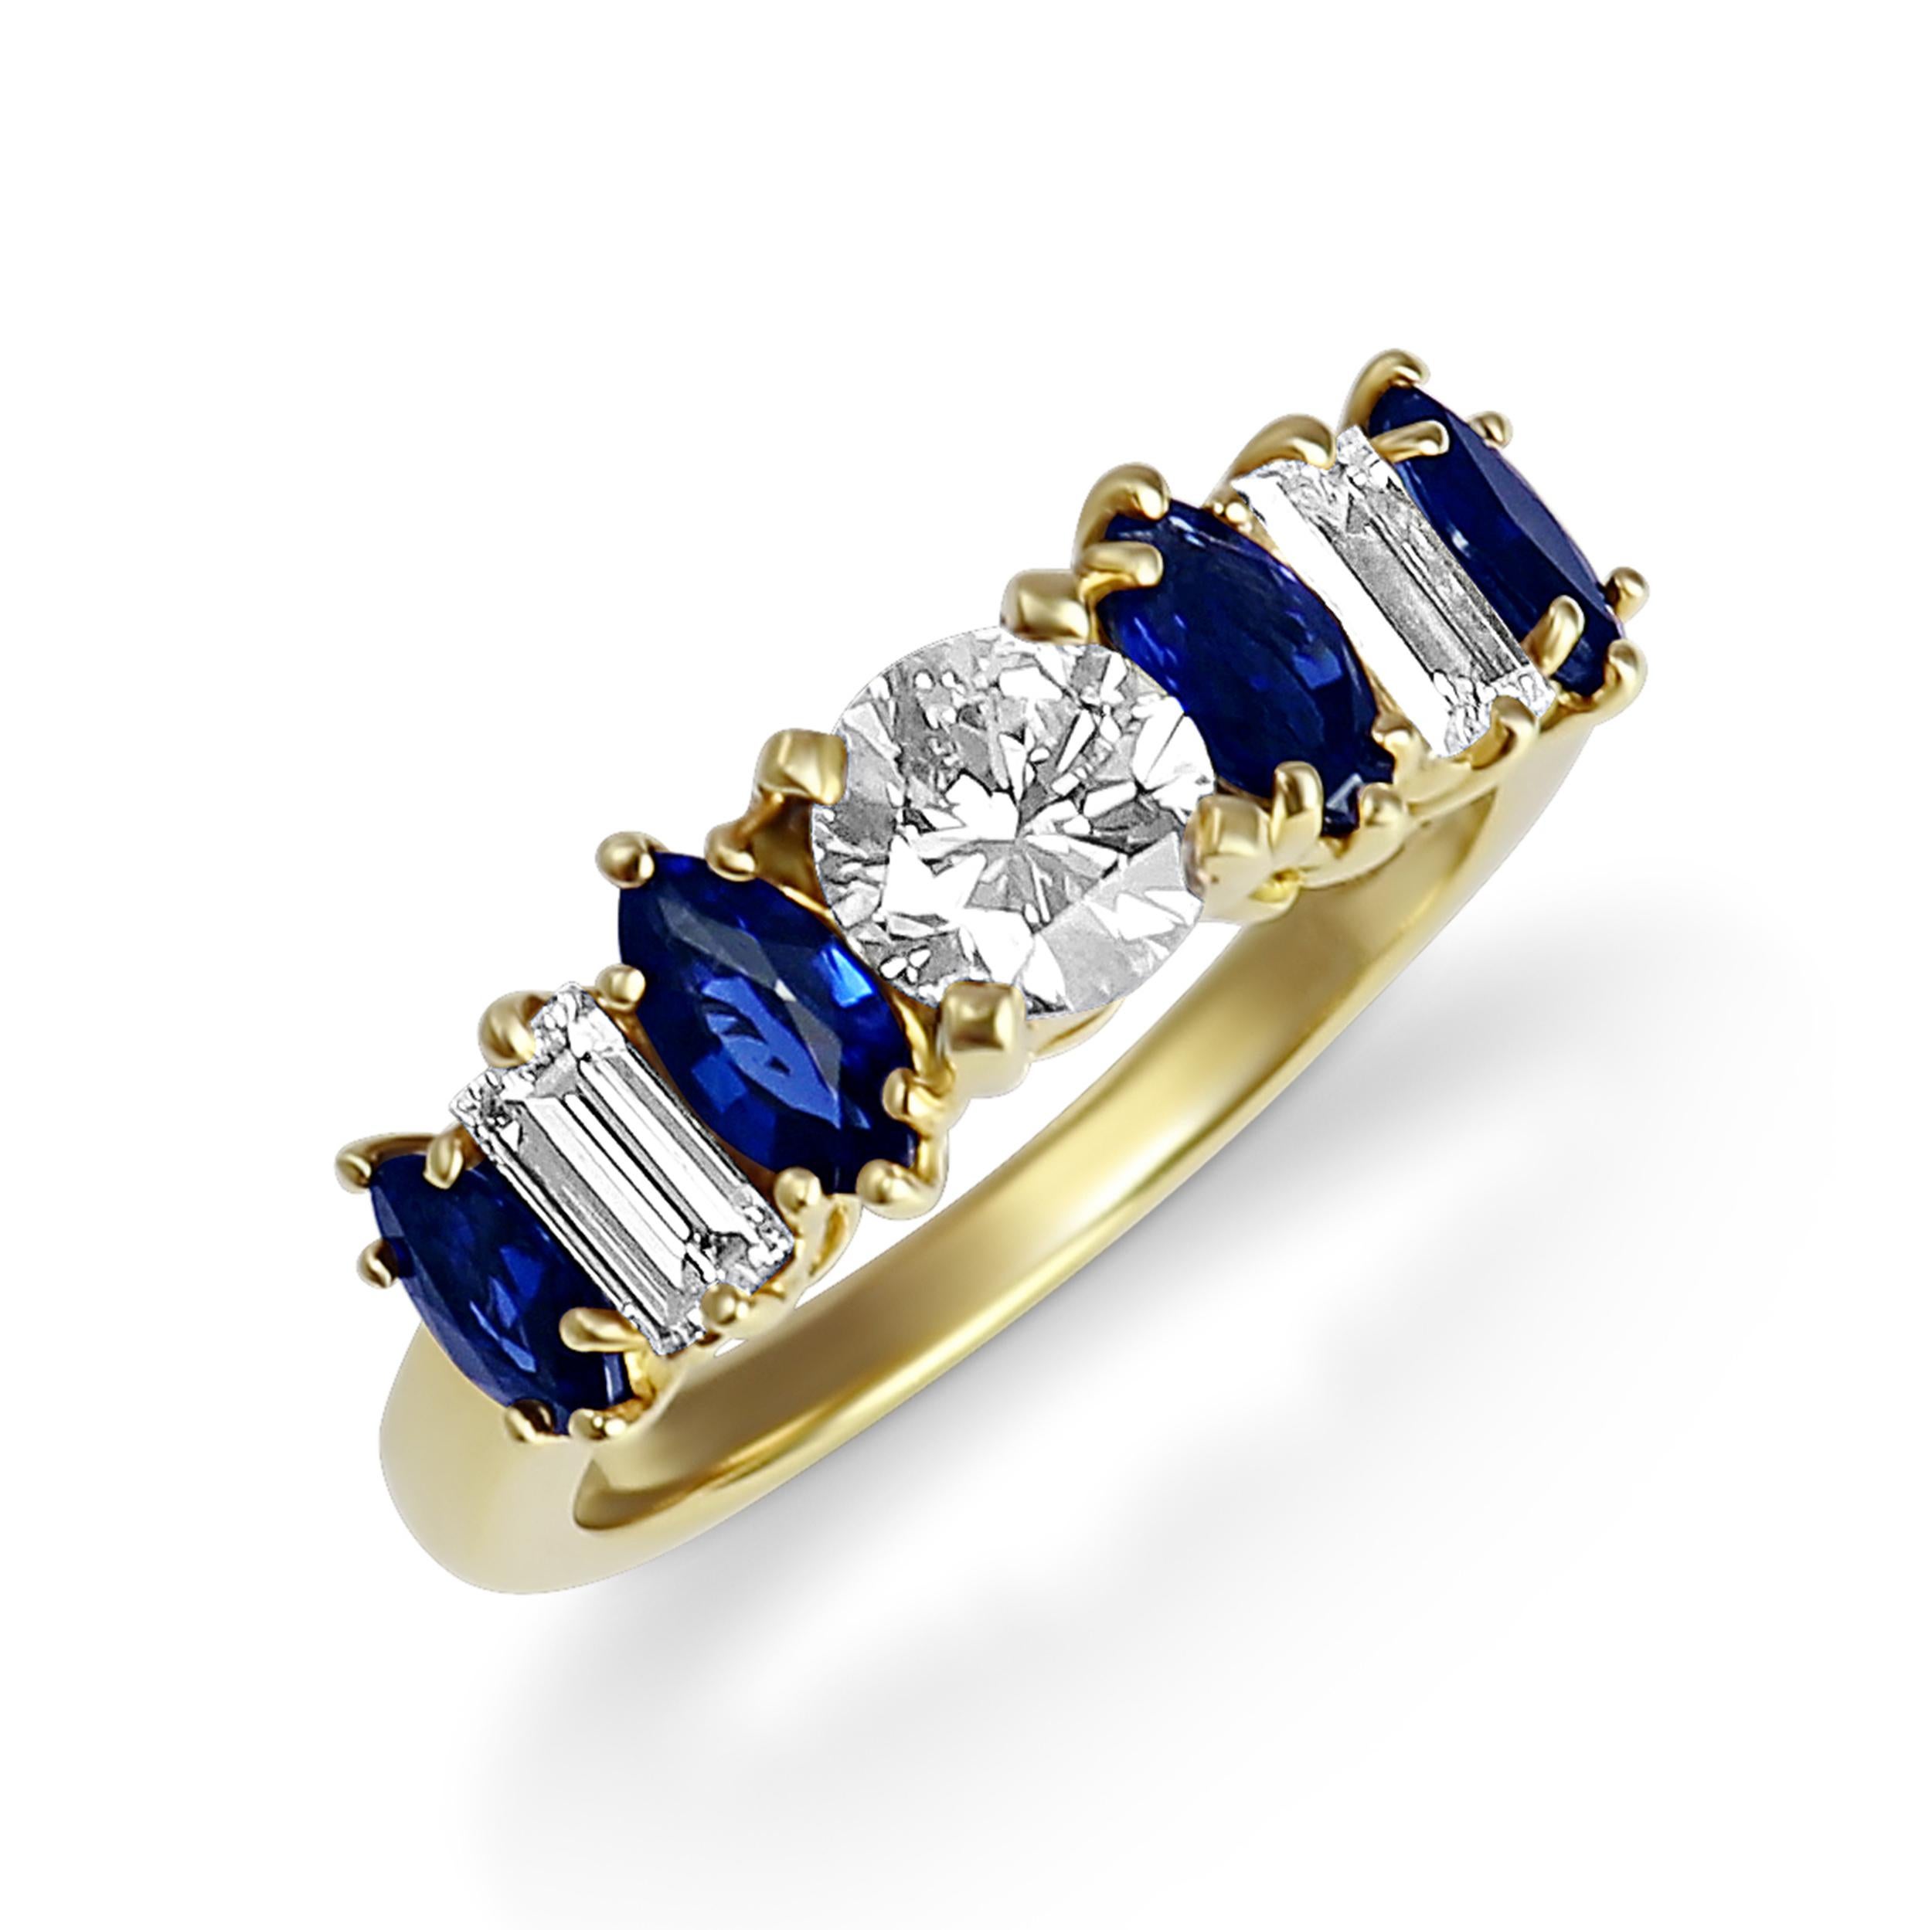 This 18 karat yellow gold ring features a 0.70-carat brilliant cut diamond as the center stone, accentuated by four marquise cut sapphires for a total weight of 1.07 carat and two baguette diamonds for a total of 0.50 carat. 
The ring is a size 6